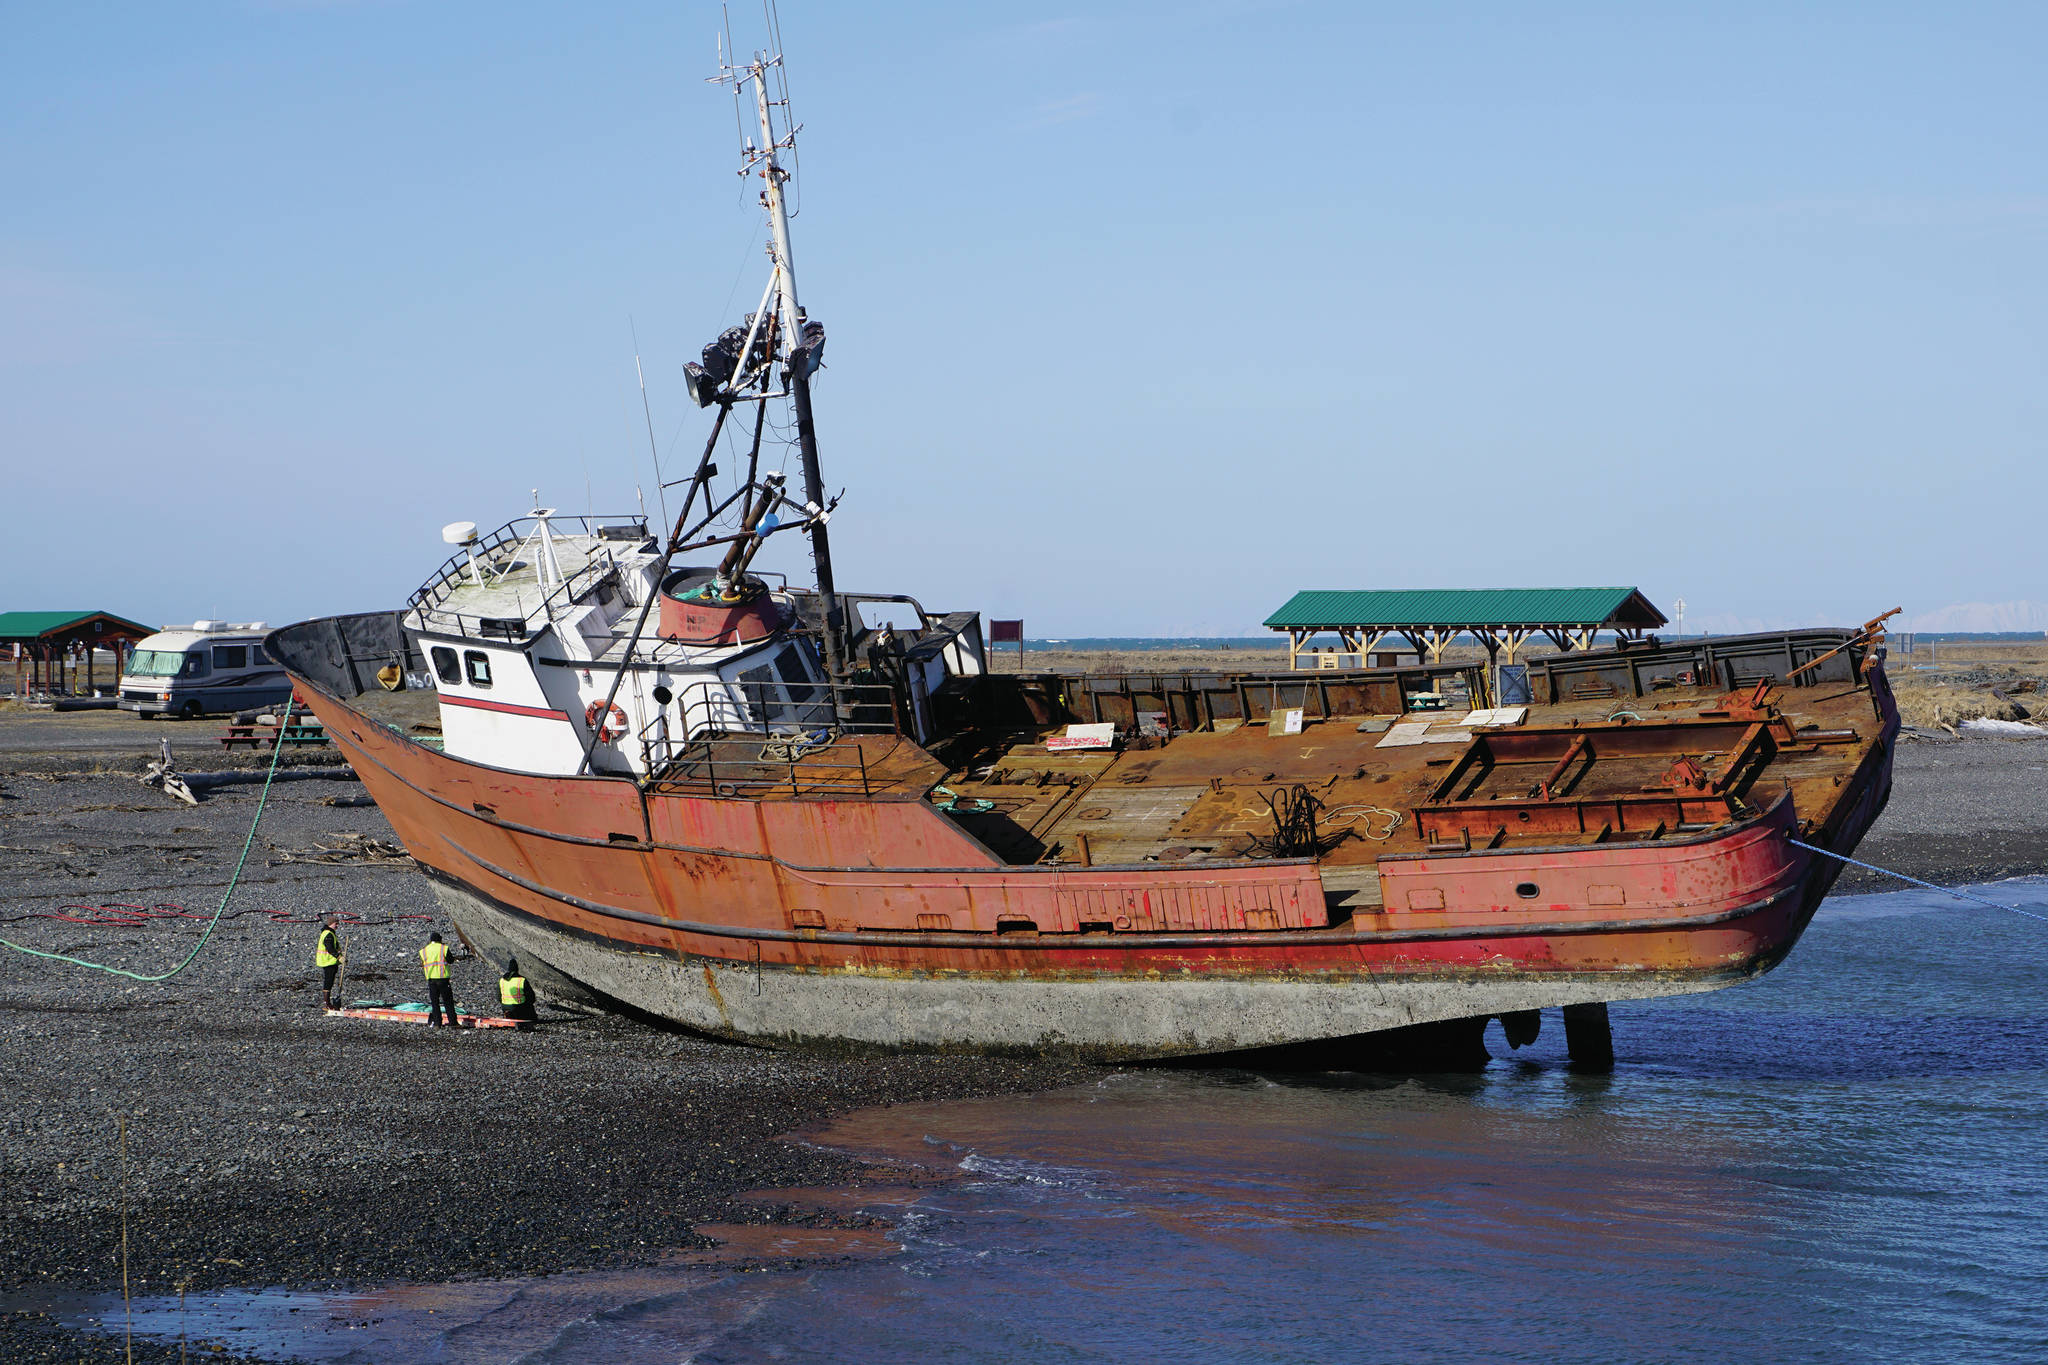 Crews work on a boat on Monday, April 5, 2021, at the large-vessel haul out beach on the Homer Spit near the Pier 1 Theatre in Homer, Alaska. In the off season boats are hauled onshore for repair at the beach near the Nick Dudiak Fishing Lagoon. (Photo by Michael Armstrong/Homer News)